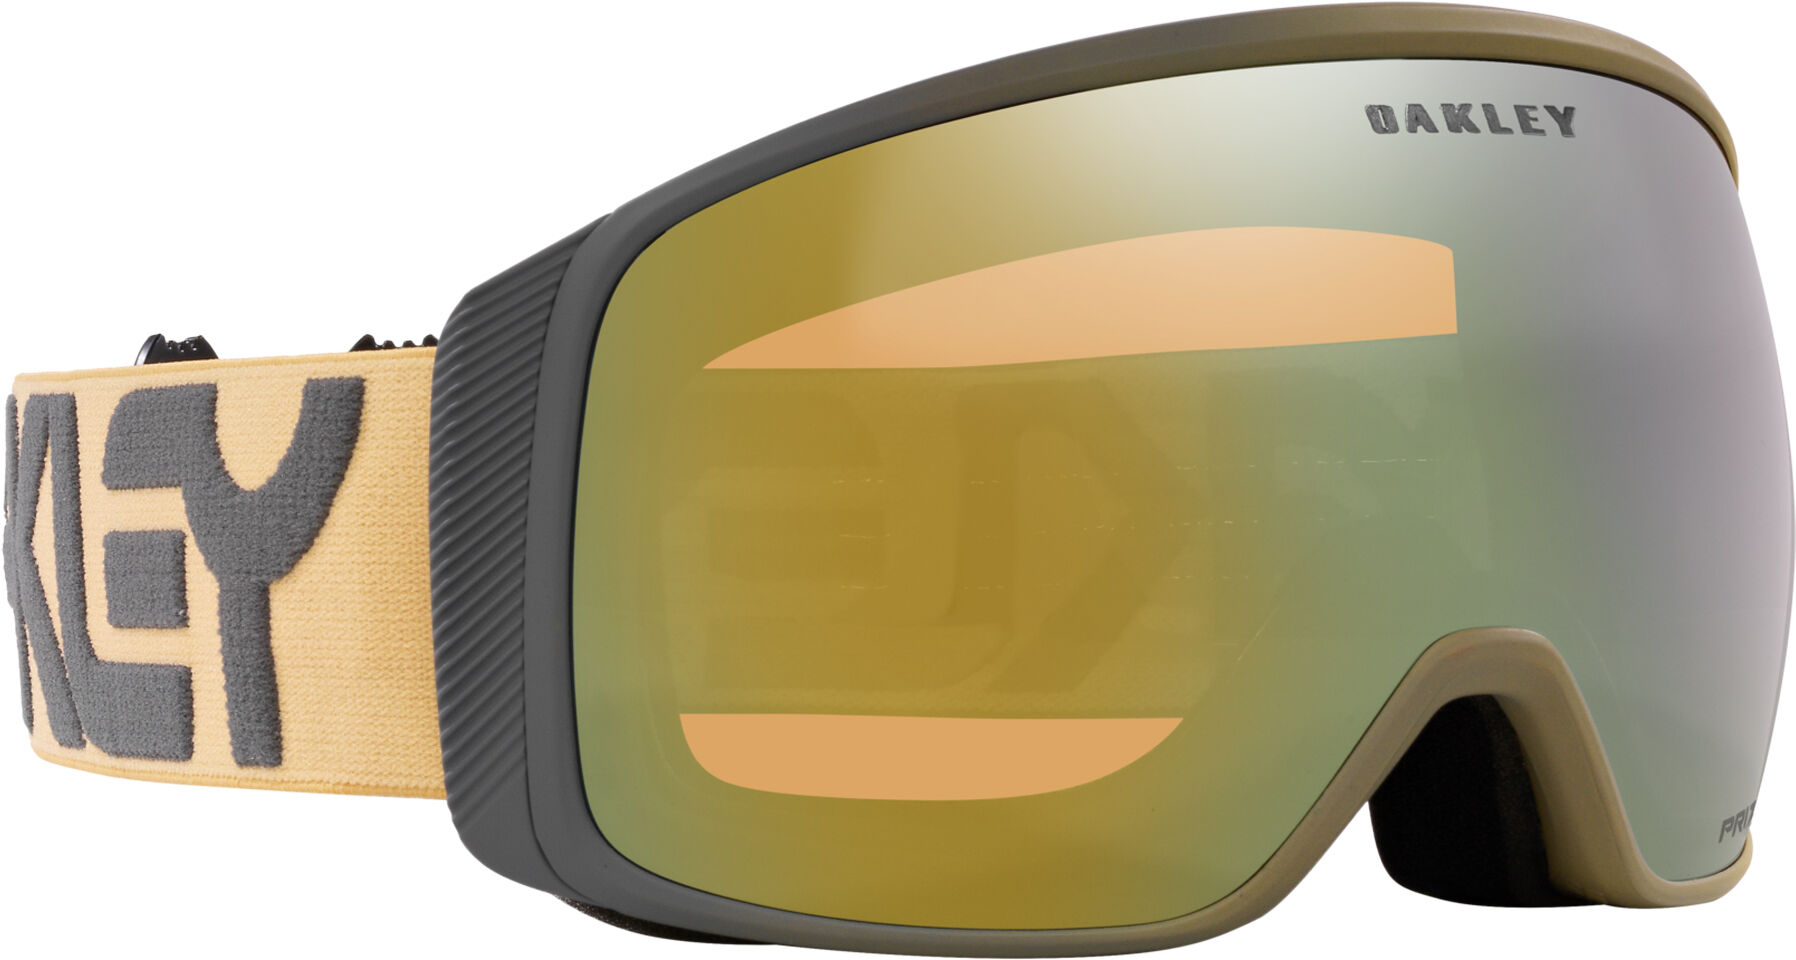 Oakley FLIGHT TRACKER L CURRY PRISM SAG GOLD One Size